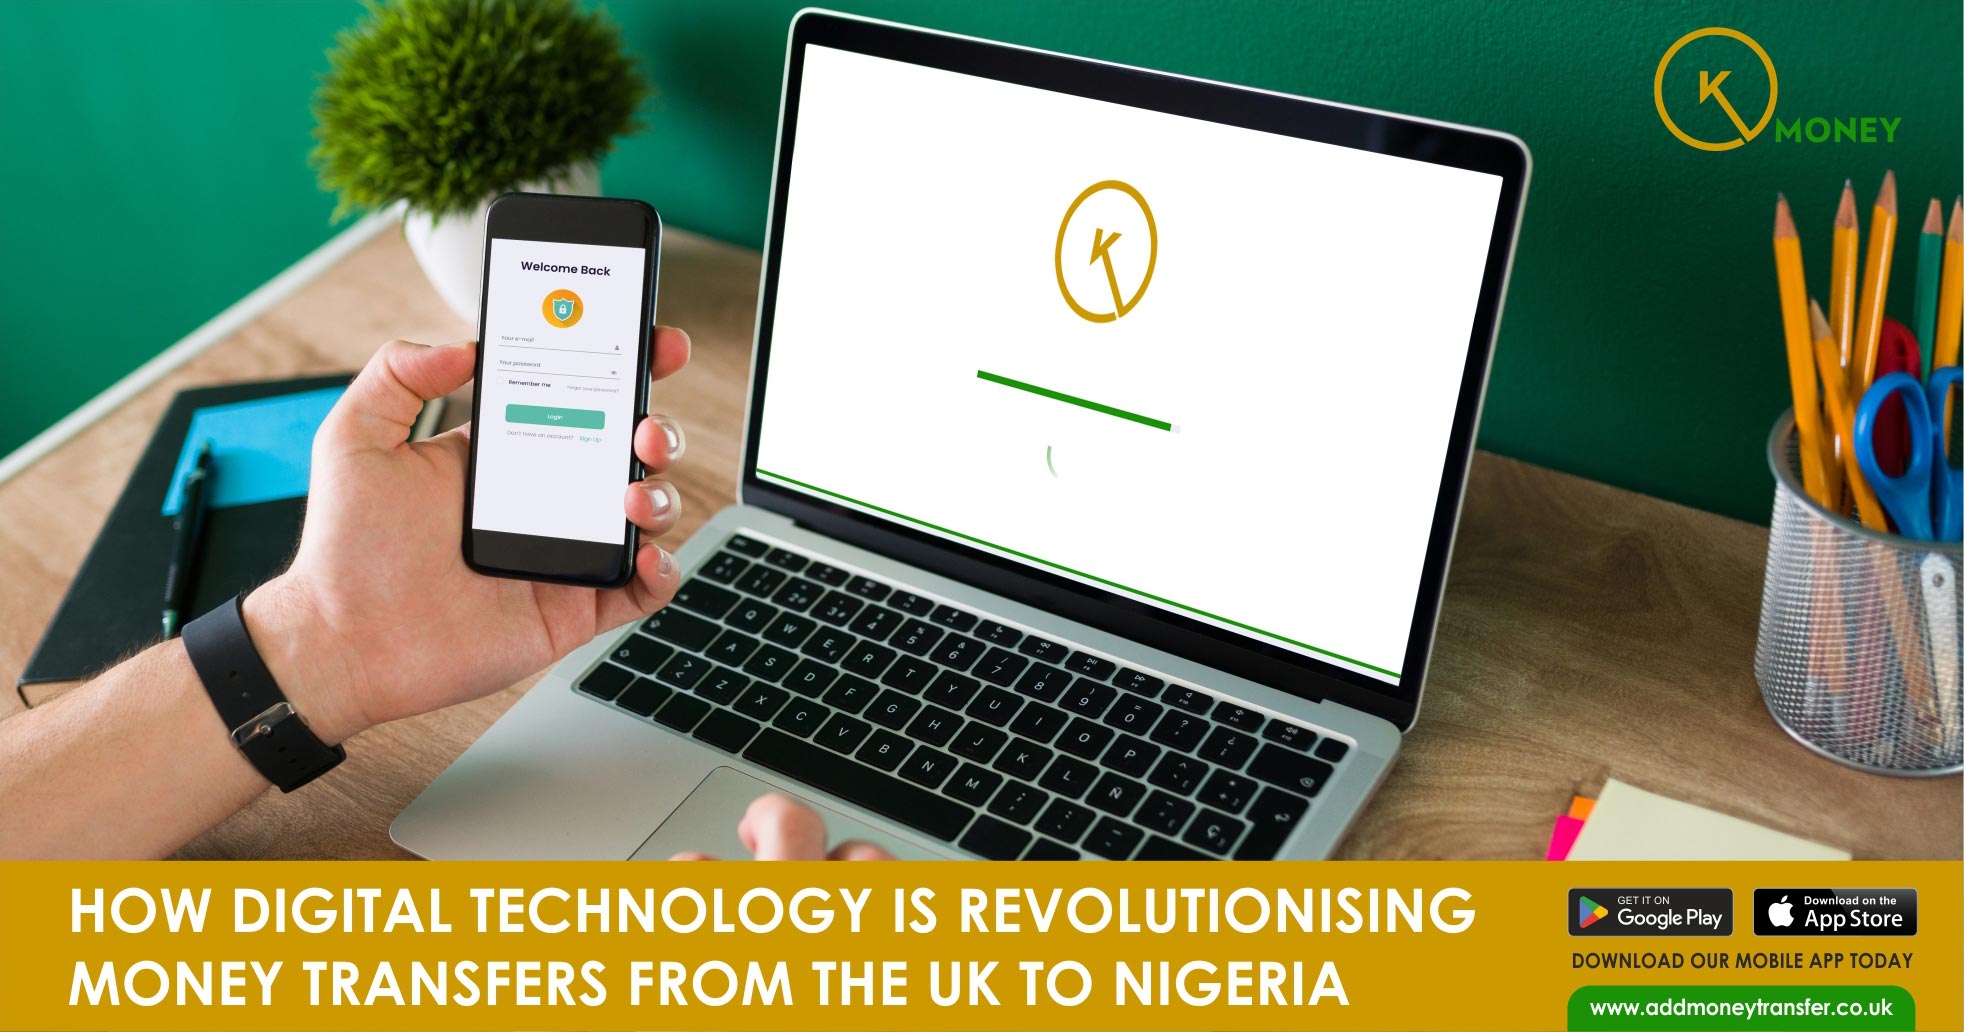 How Digital Technology is Revolutionising Money Transfers from the UK to Nigeria?